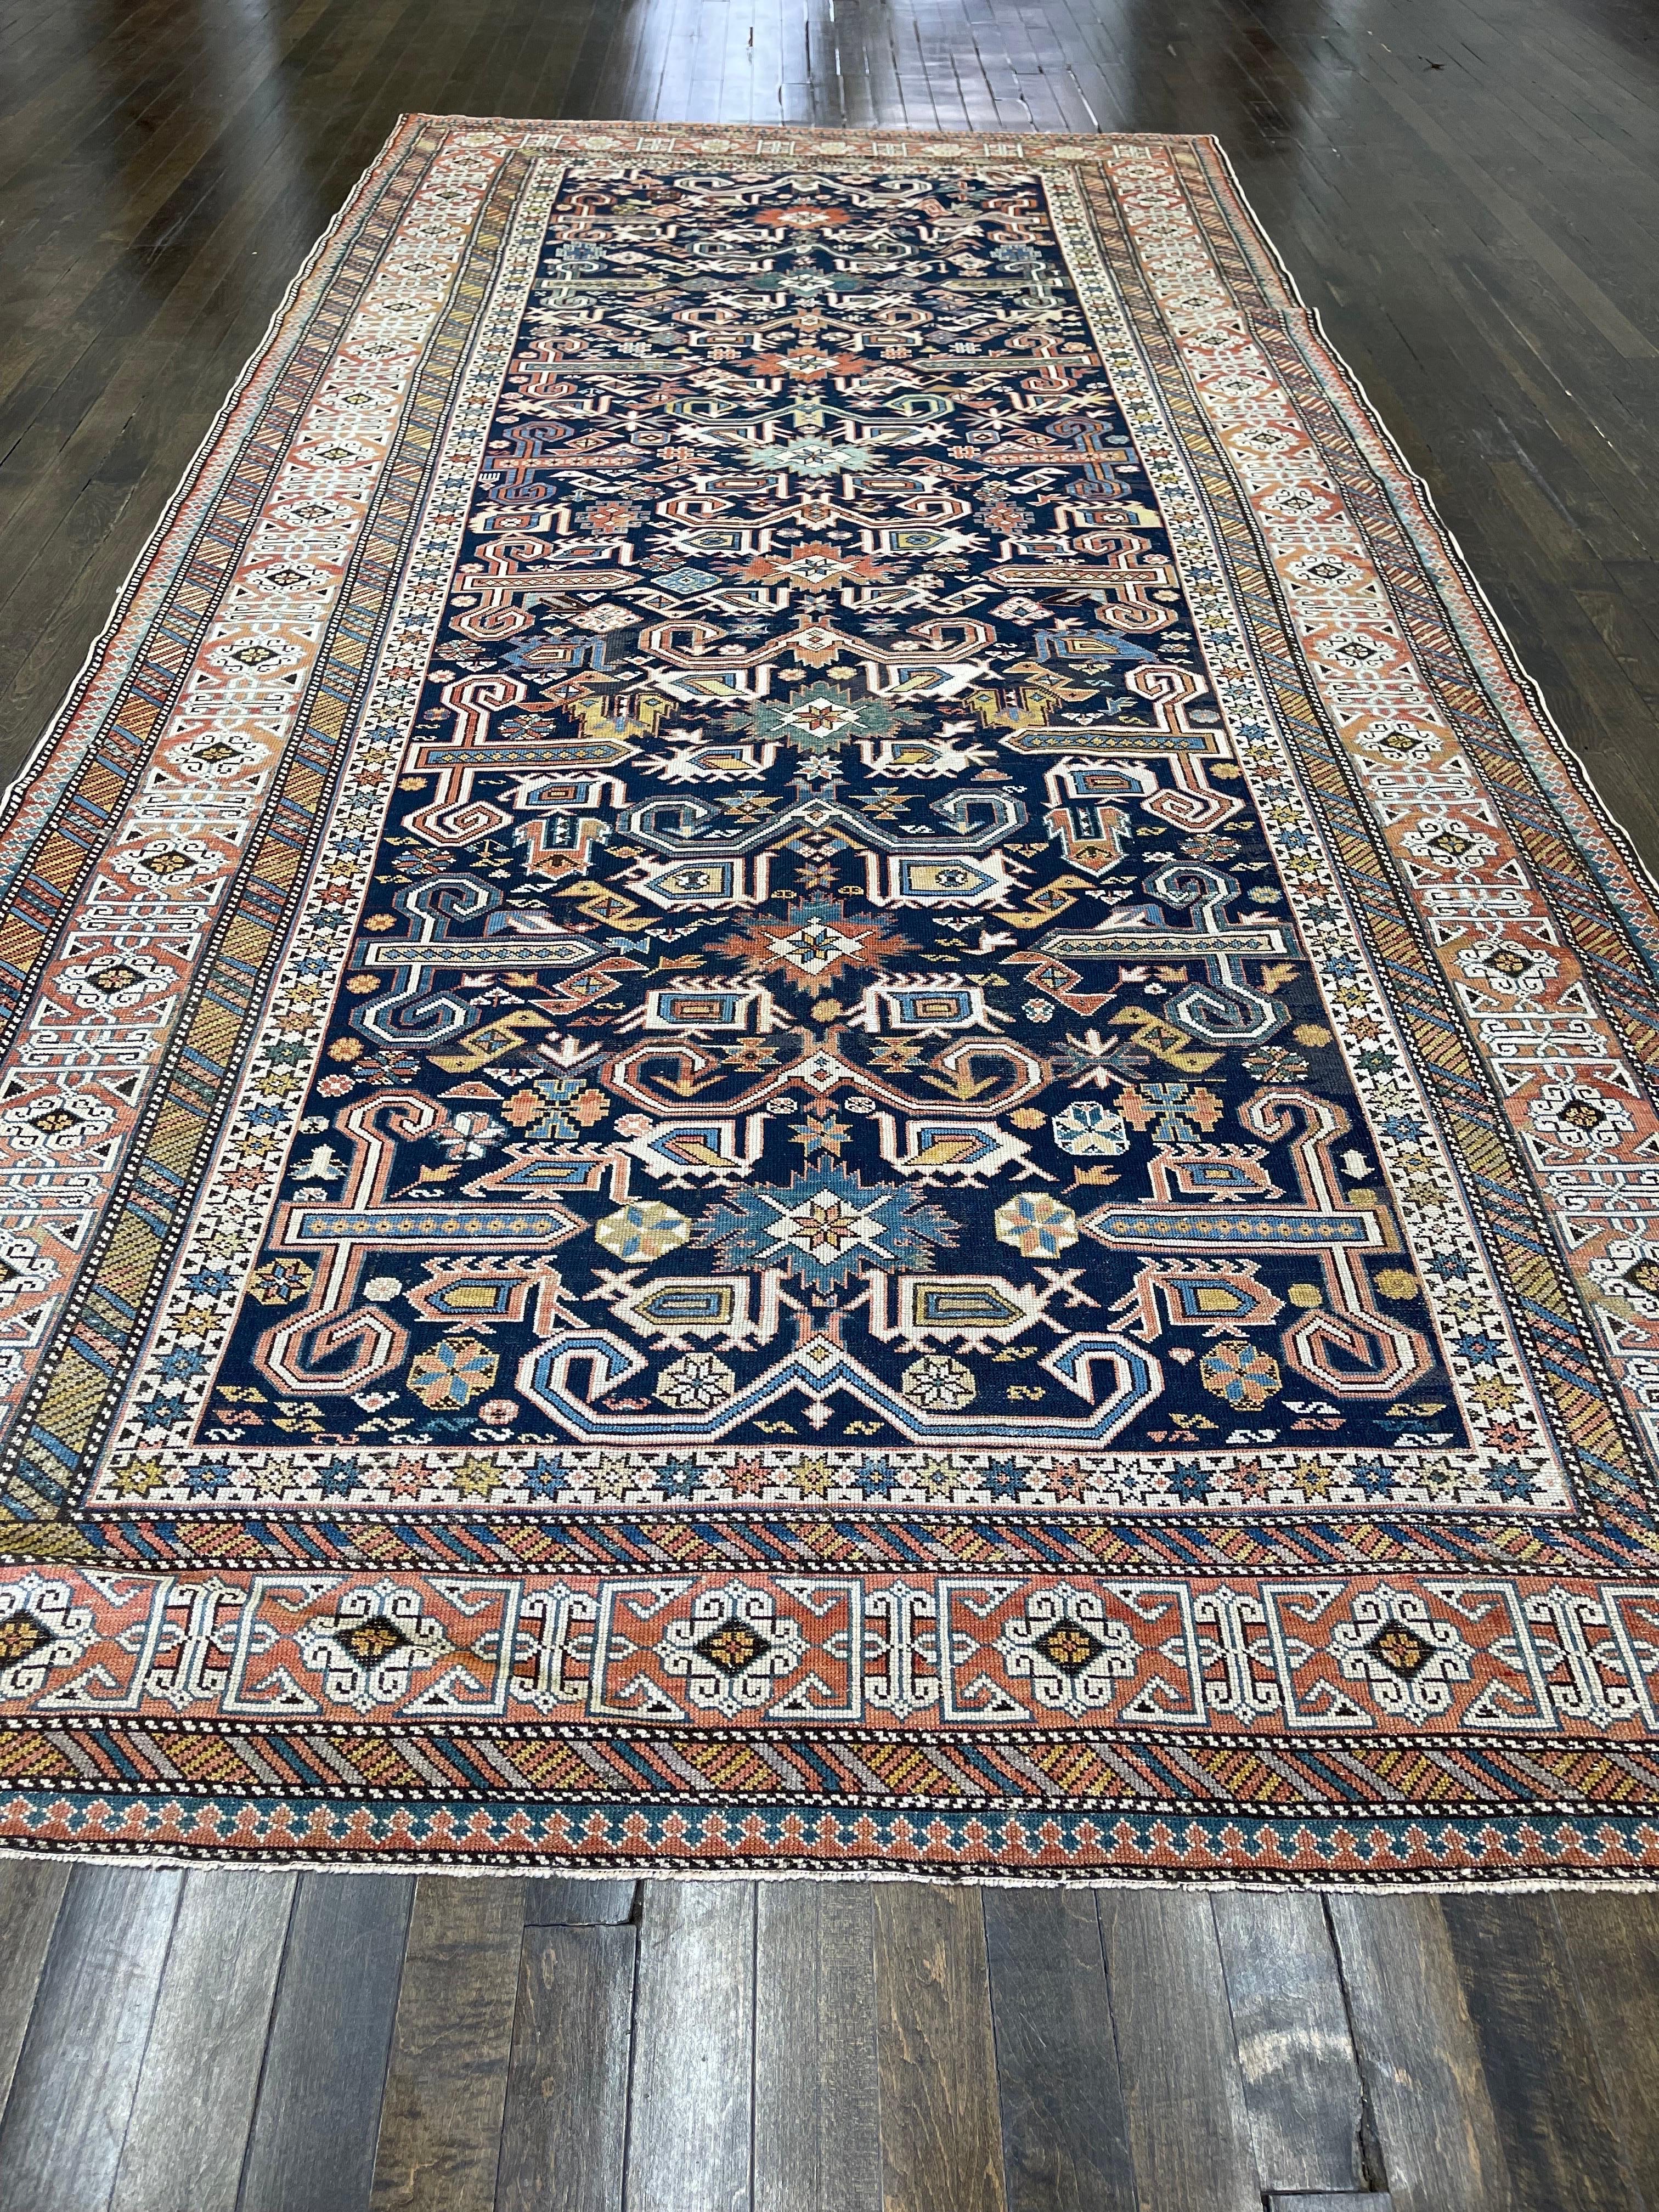 Extremely rare, Perpedil, Kuba district this rug is hand woven in Eastern Caucasus. This tightly woven rug contains nine ram's horns (wurma) in the center of the deep indigo-blue field separated by beautiful red flowers. Four animals frame each